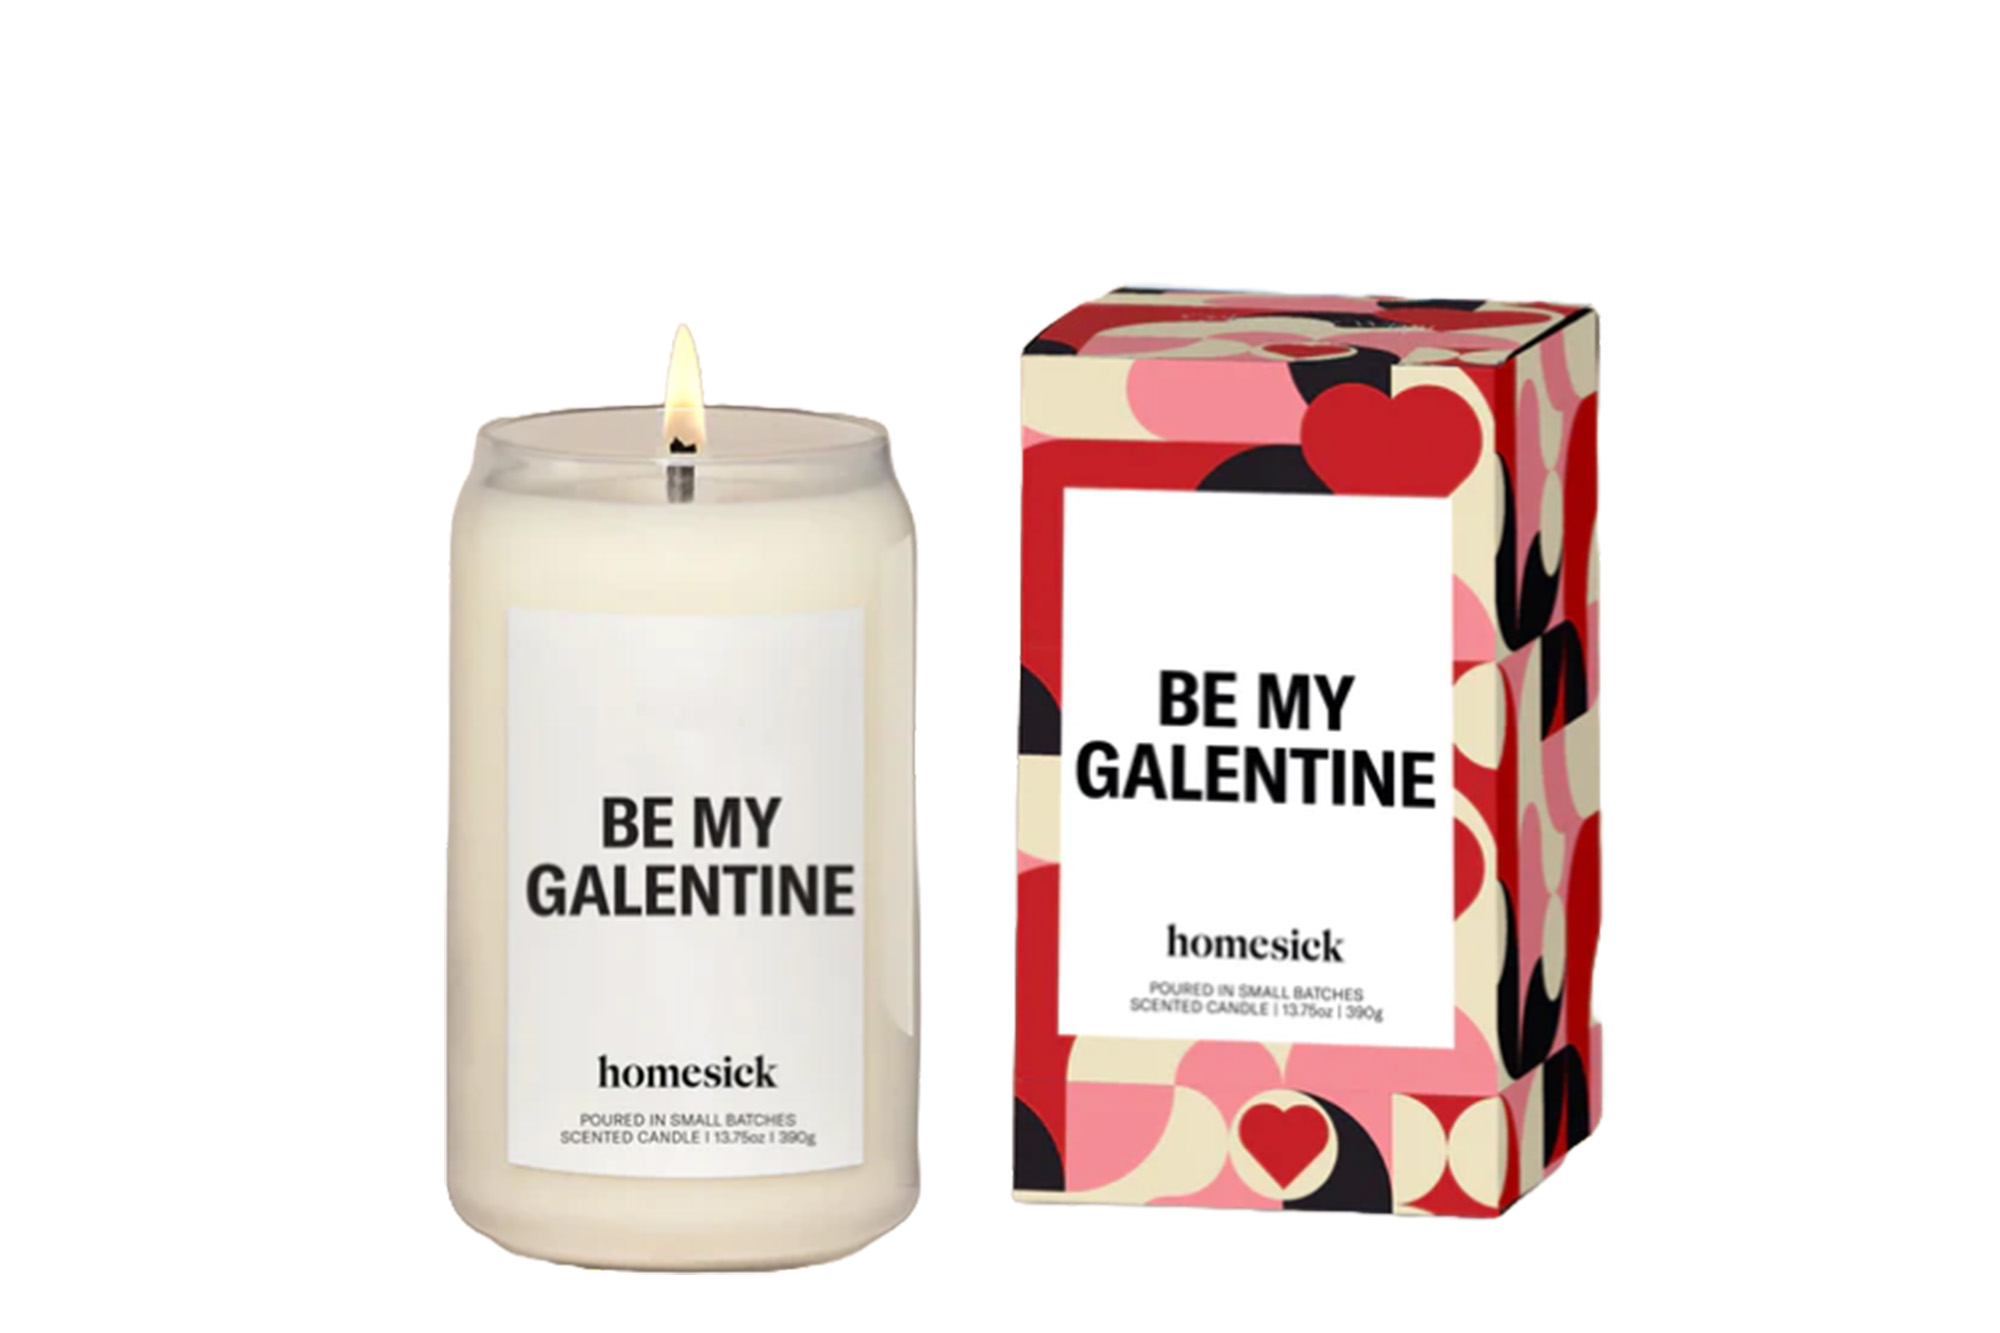 Homesick Be My Galentine Candle